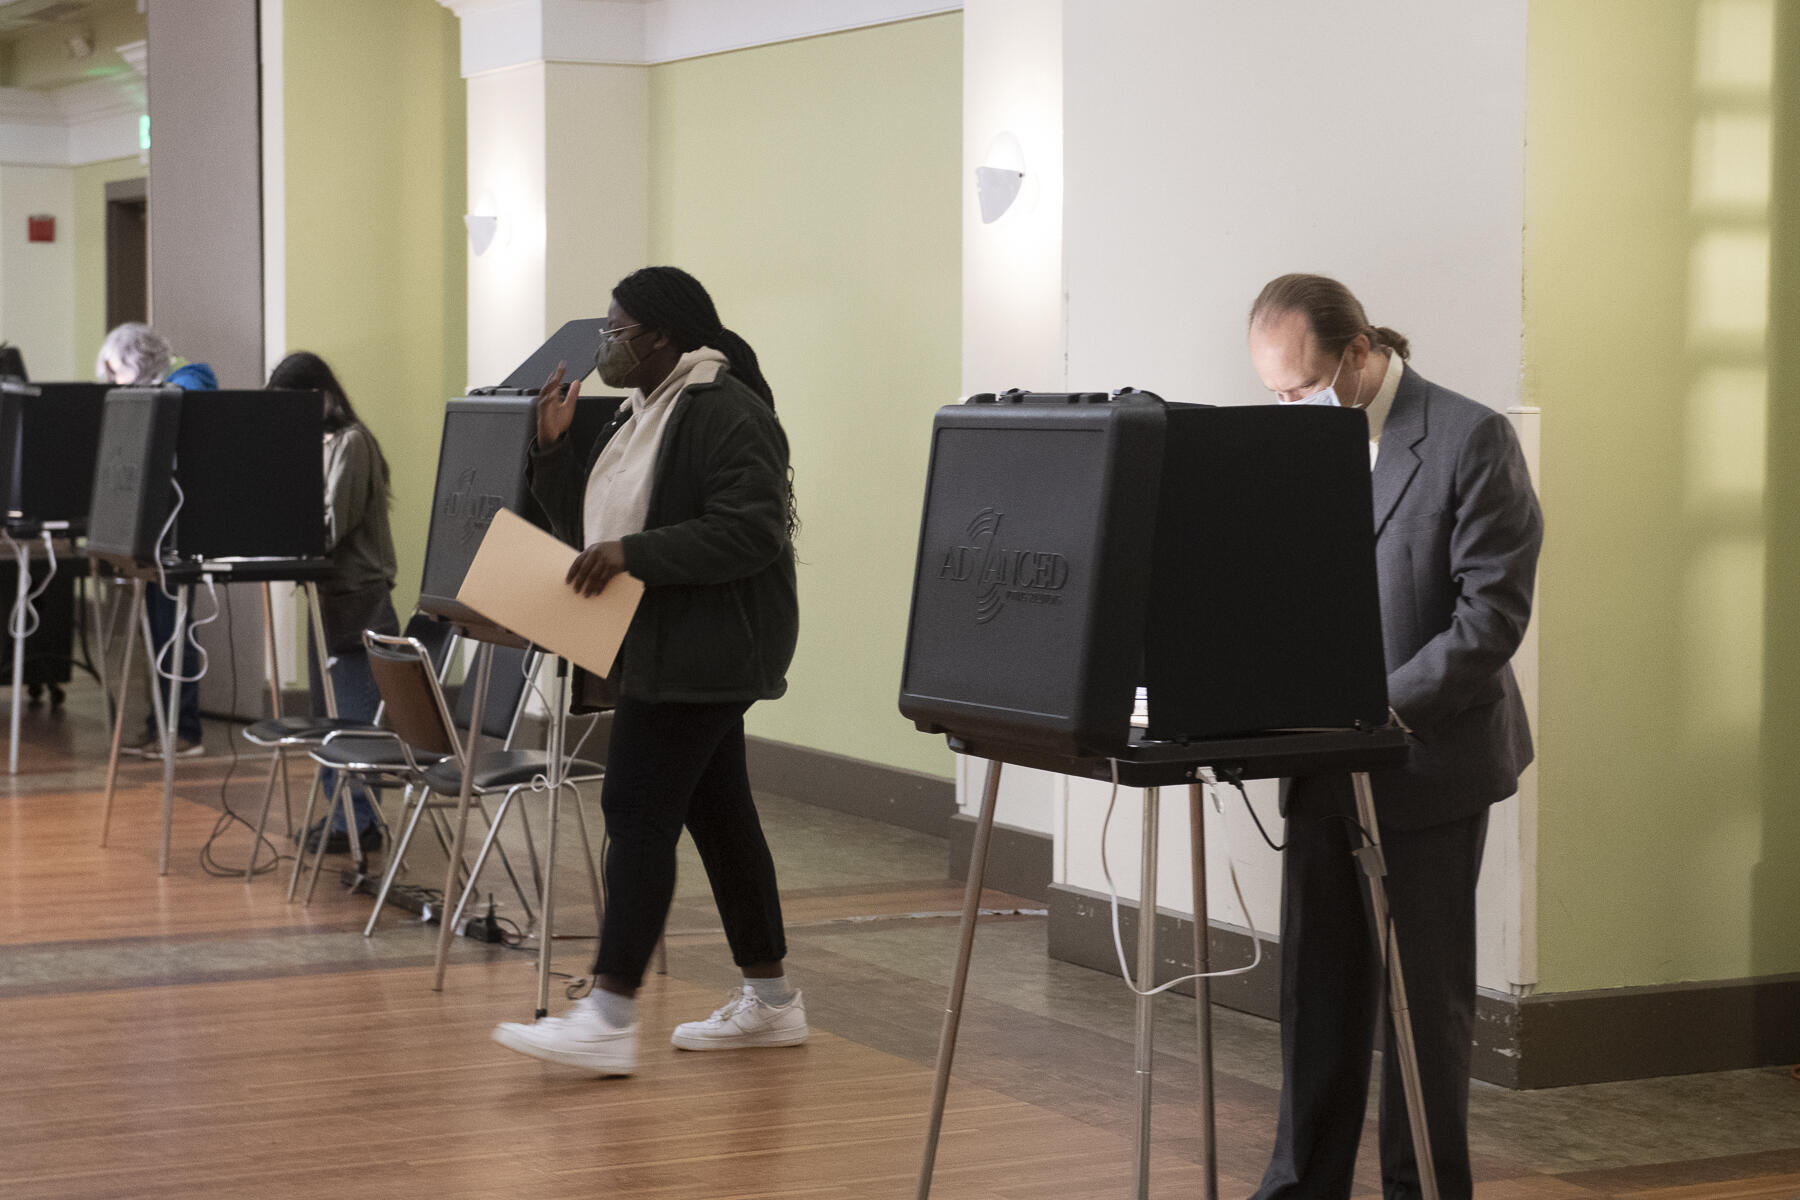 Voting on Election Day 2021 at Virginia Commonwealth University